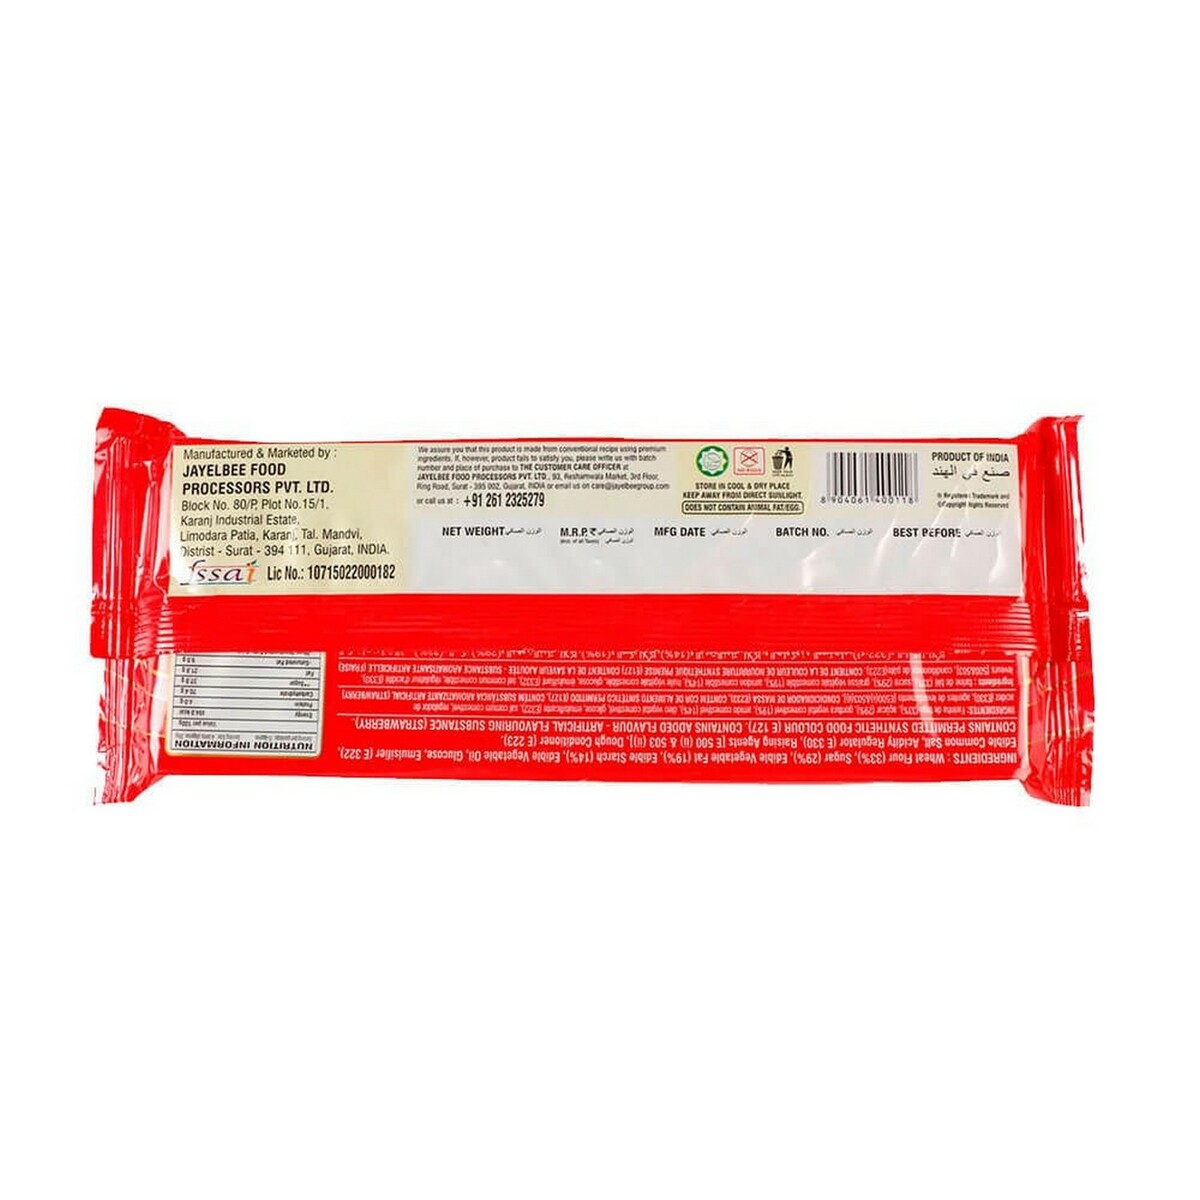 Gourmets_Delite_Wafer_Biscuit_Strawberry_75g